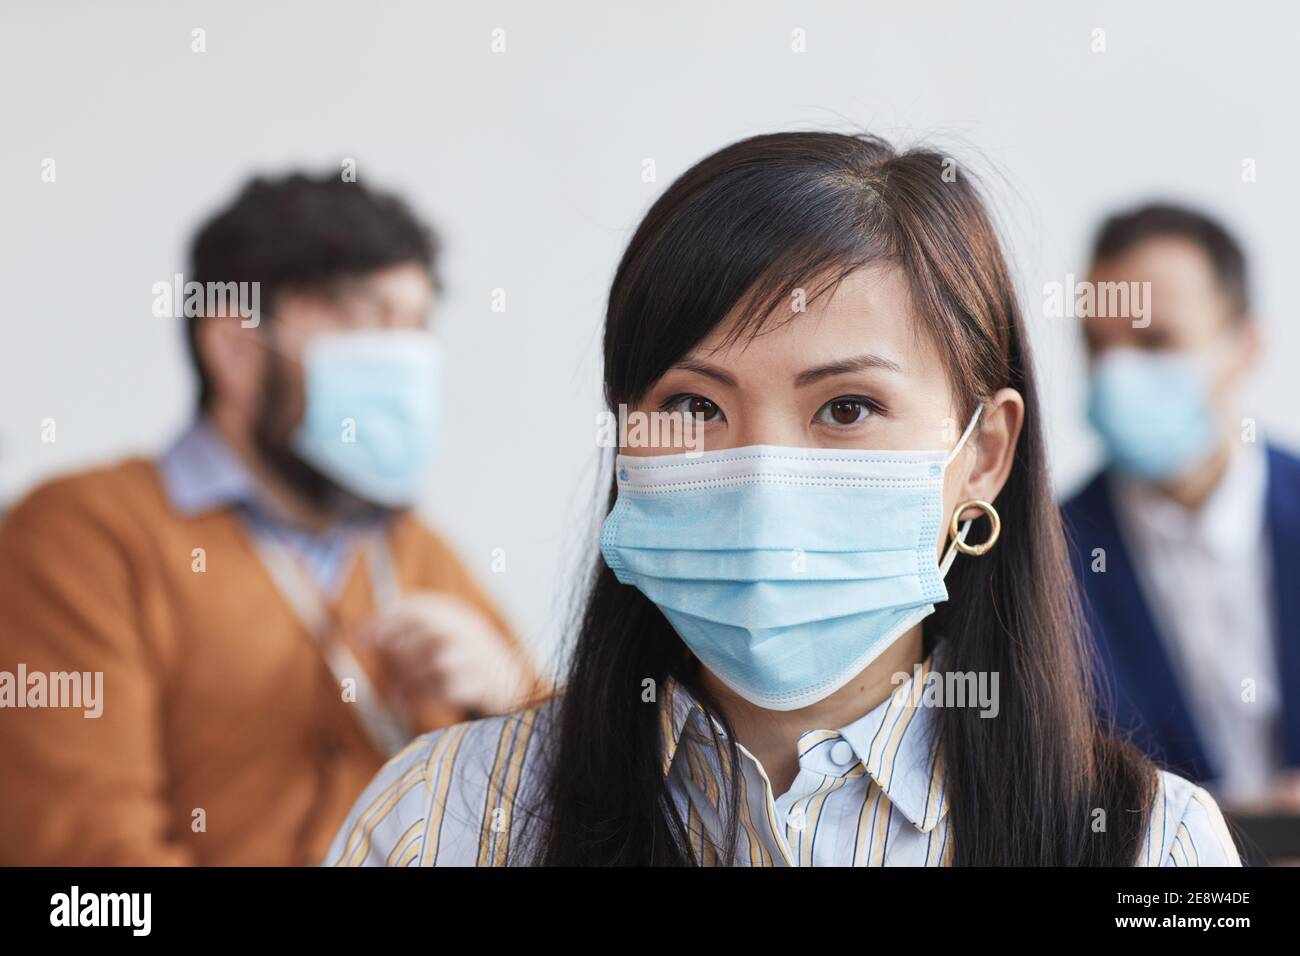 Front view portrait of Asian businesswoman wearing mask and looking at camera with people in background, copy space Stock Photo